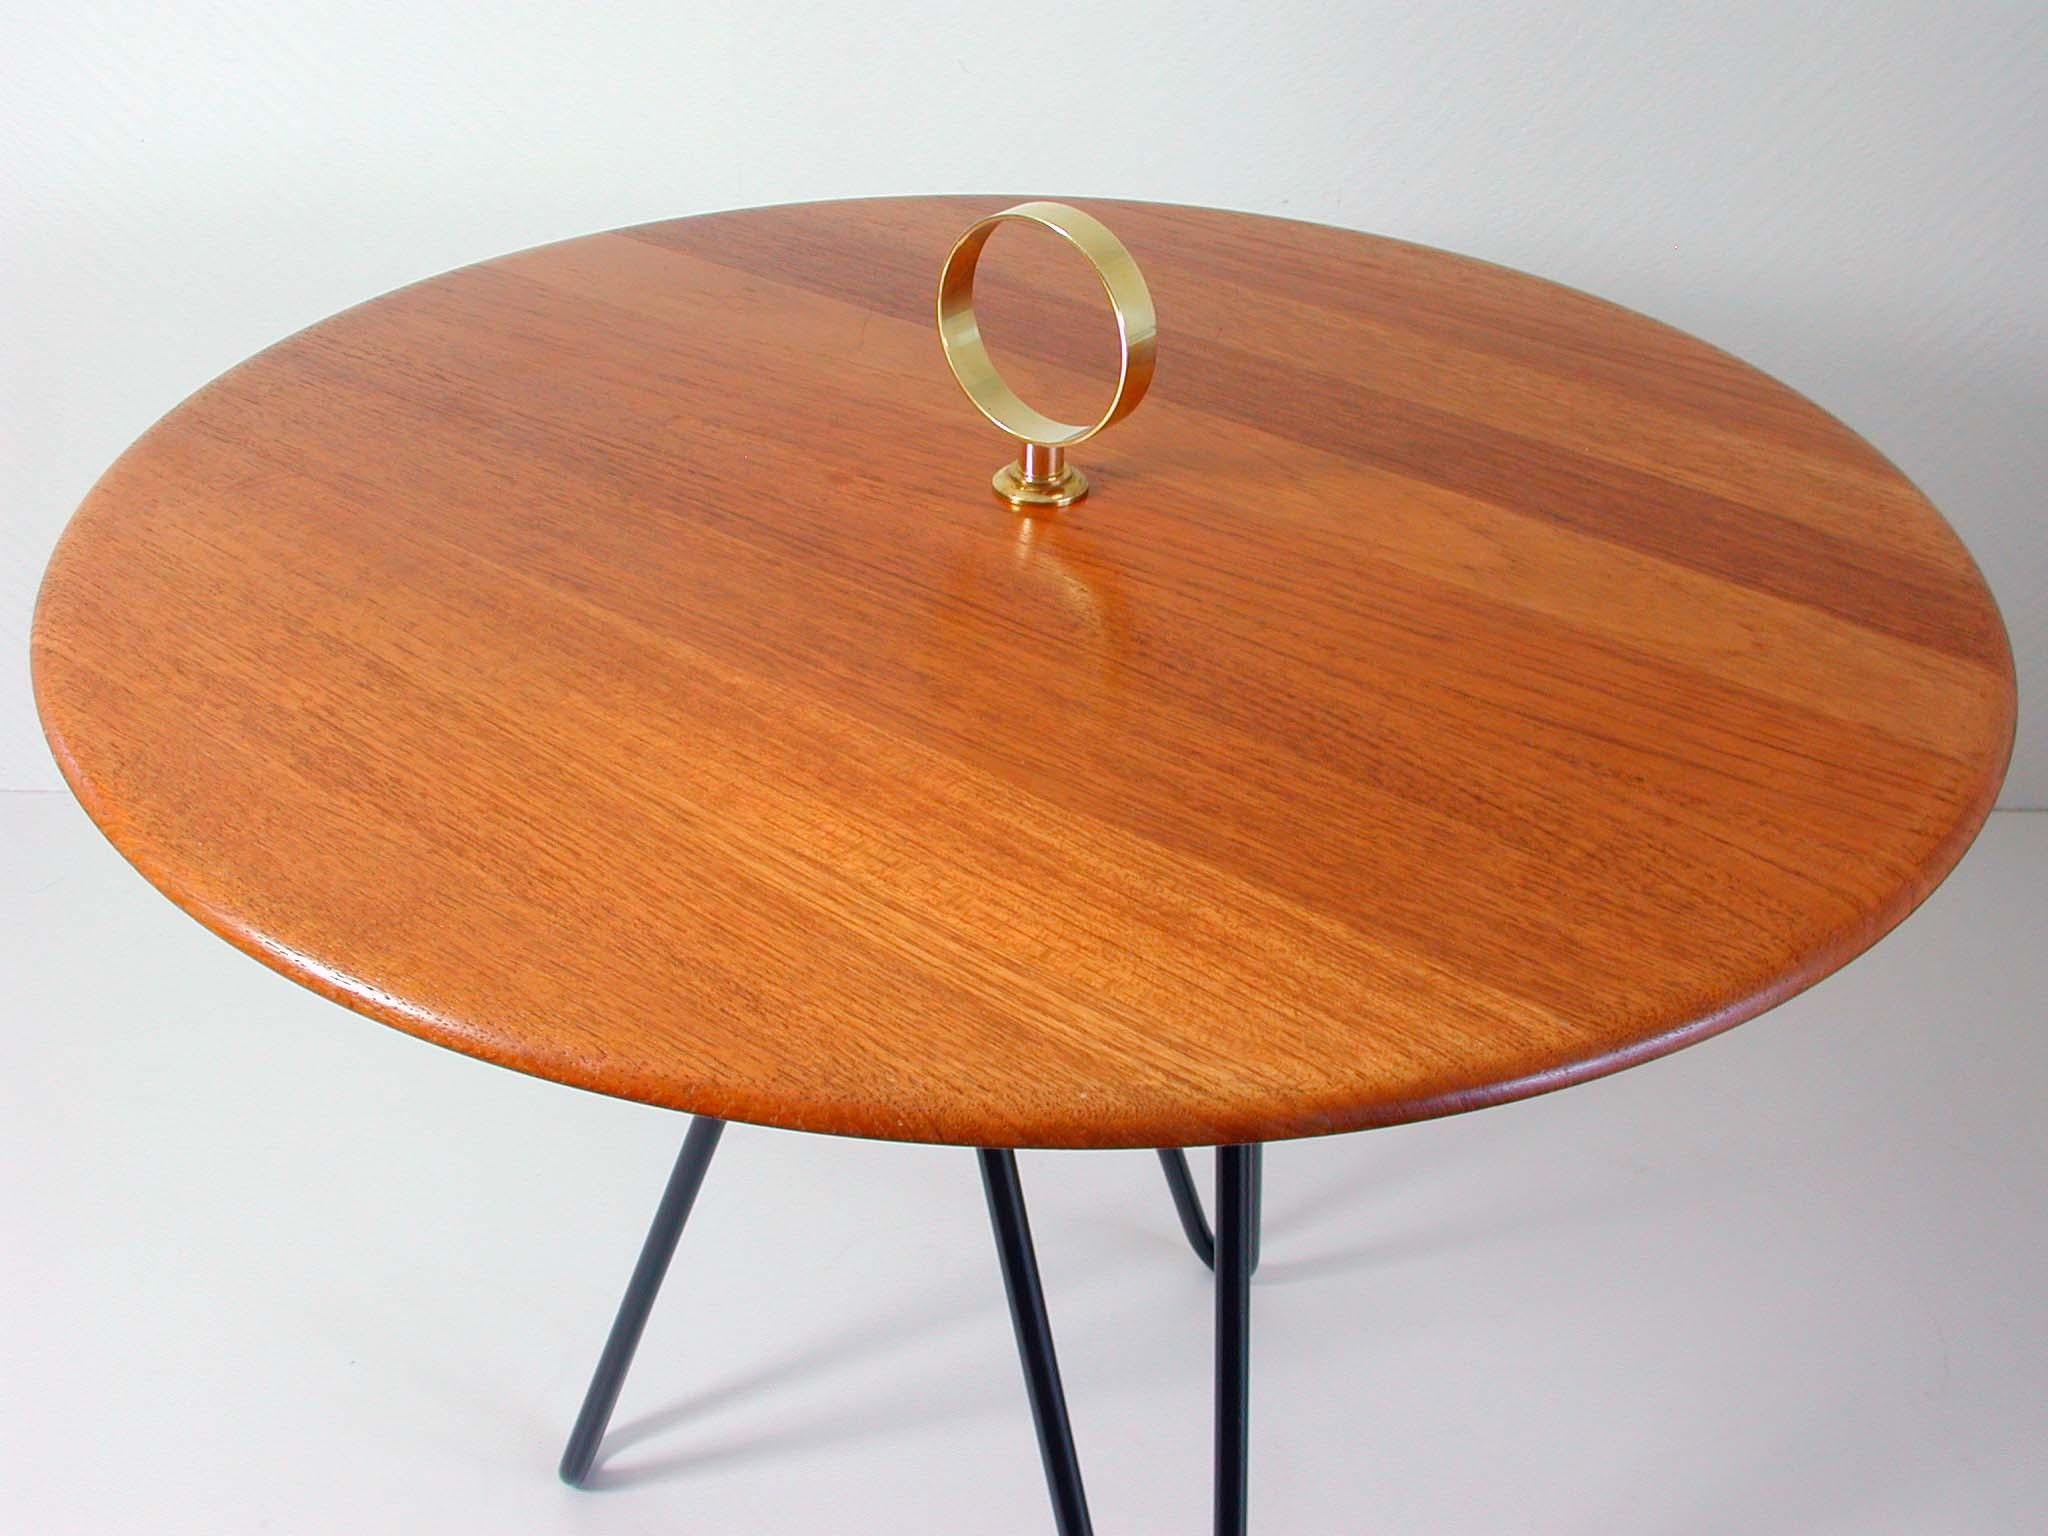 Mid-20th Century Midcentury Teak, Brass and Cast Iron Tripod Side Table by Digsmed, Denmark For Sale